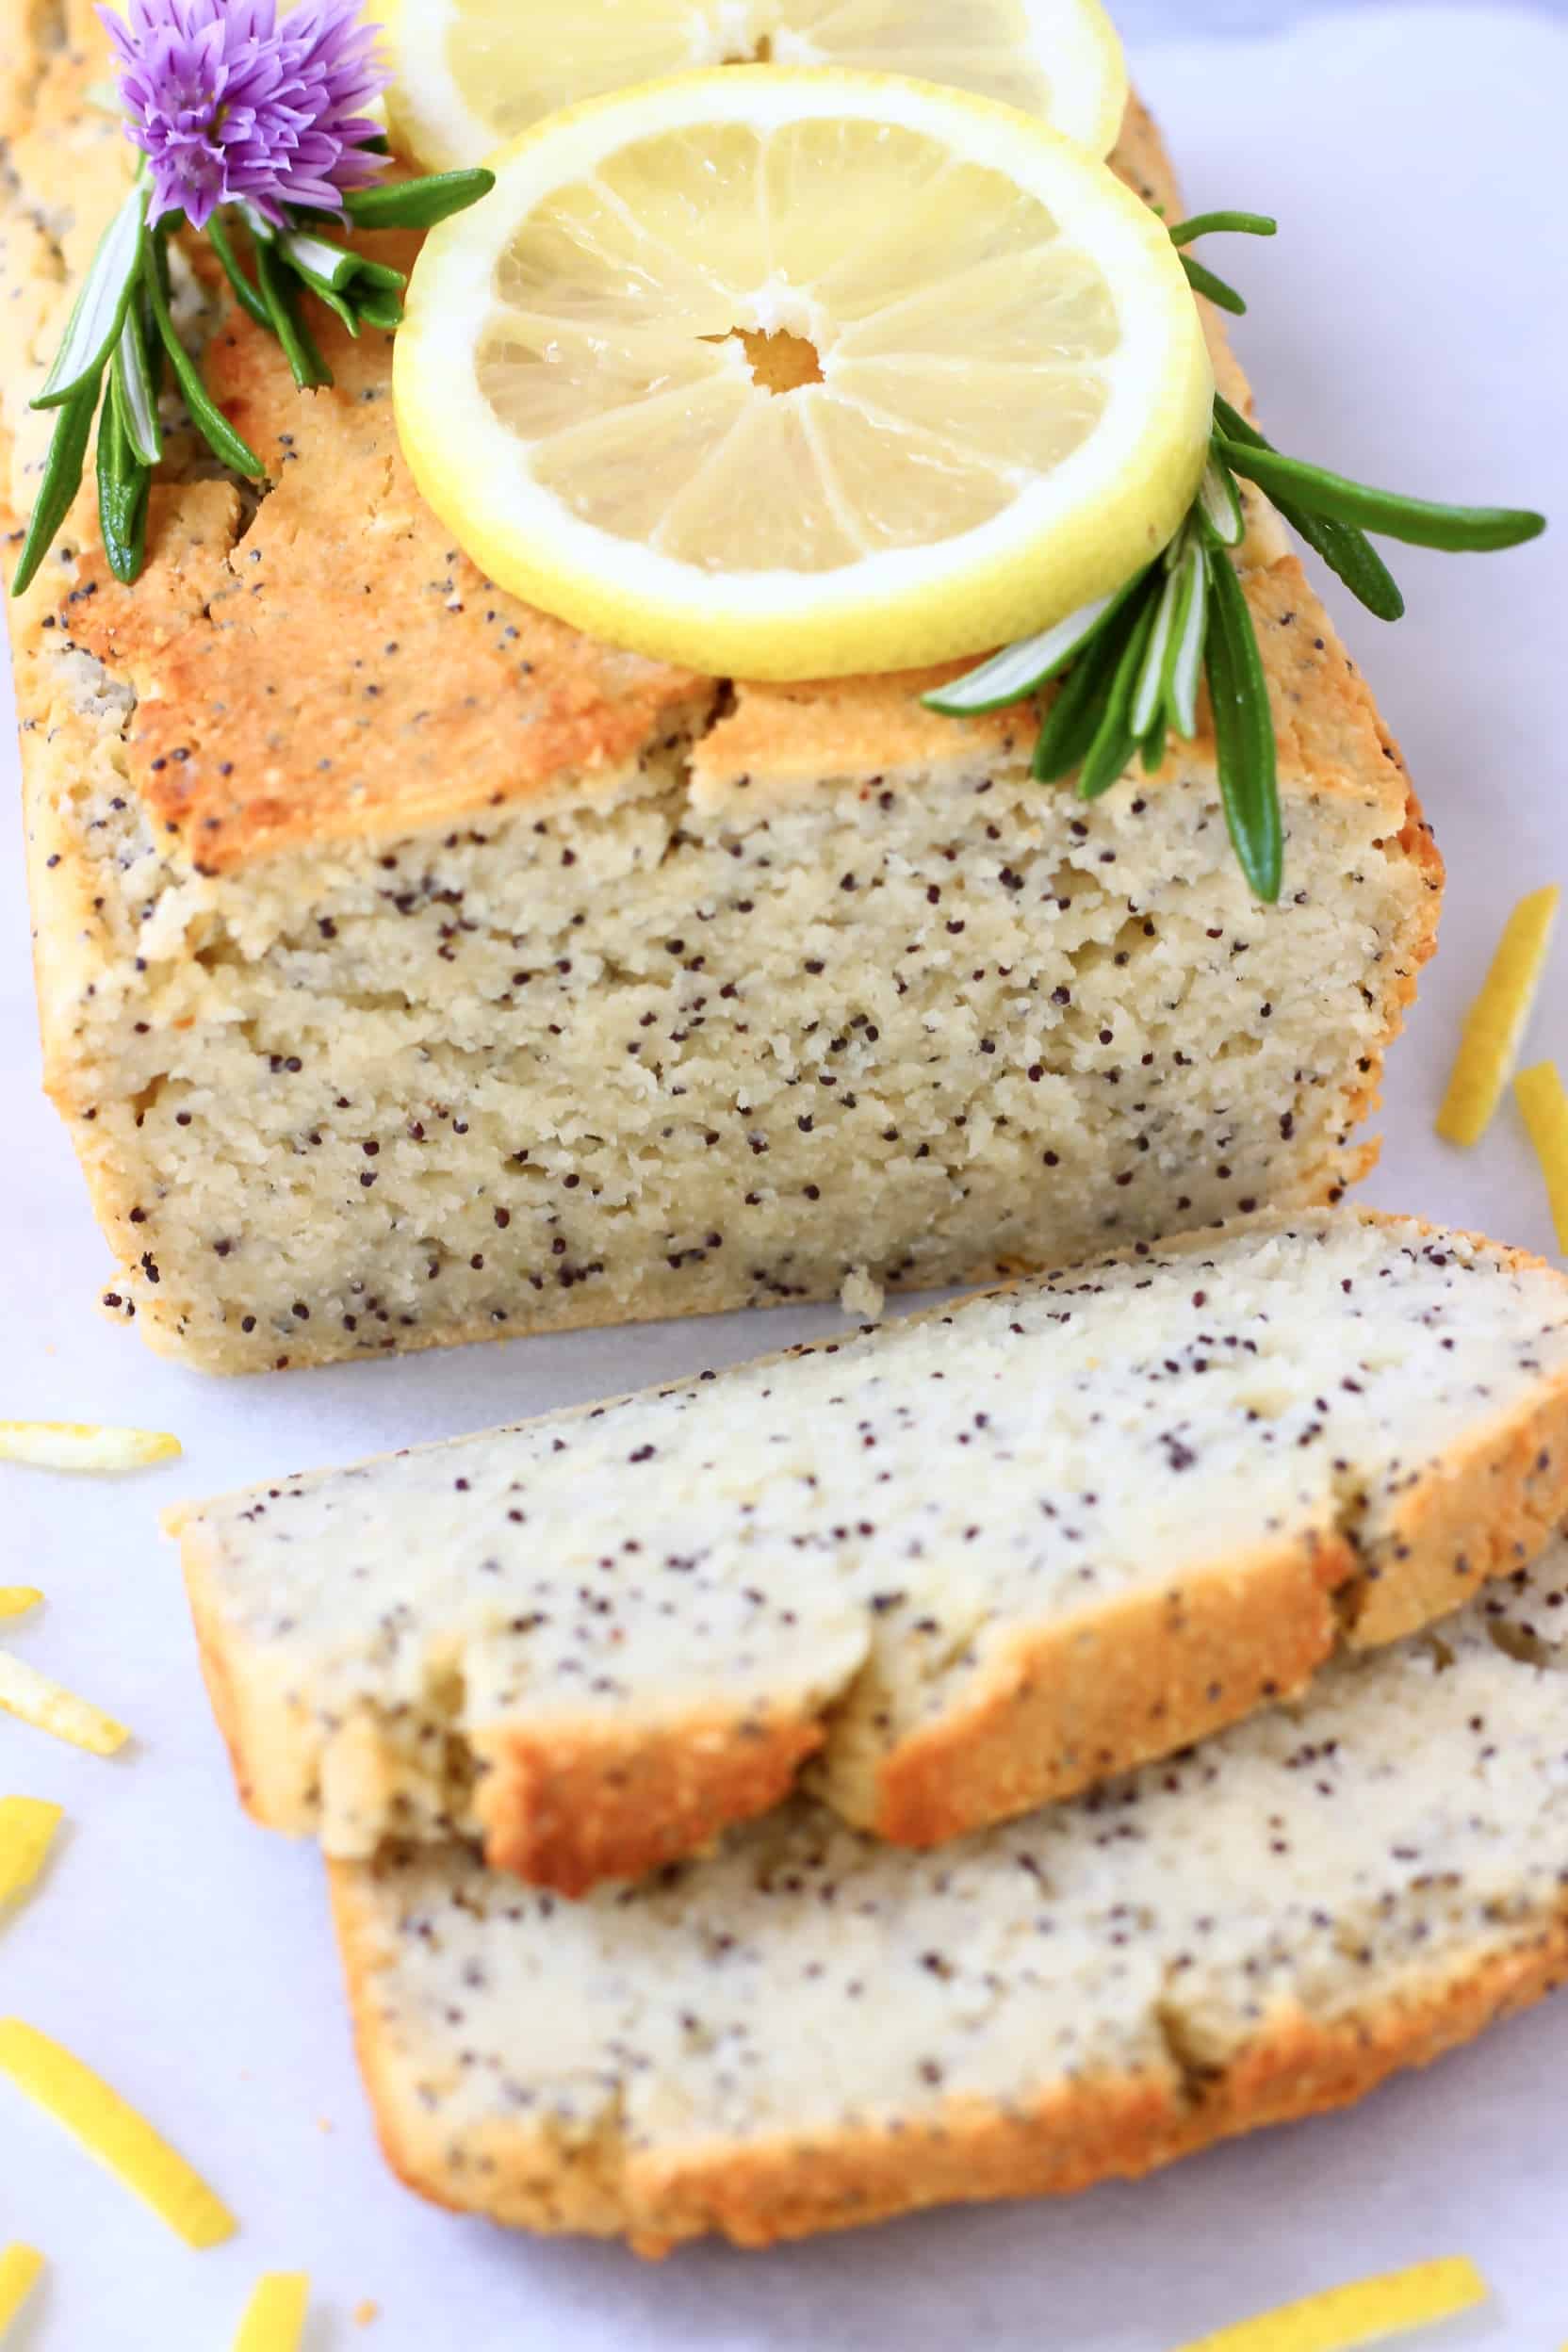 A loaf of gluten-free vegan lemon poppy seed bread with two slices next to it topped with lemon slices